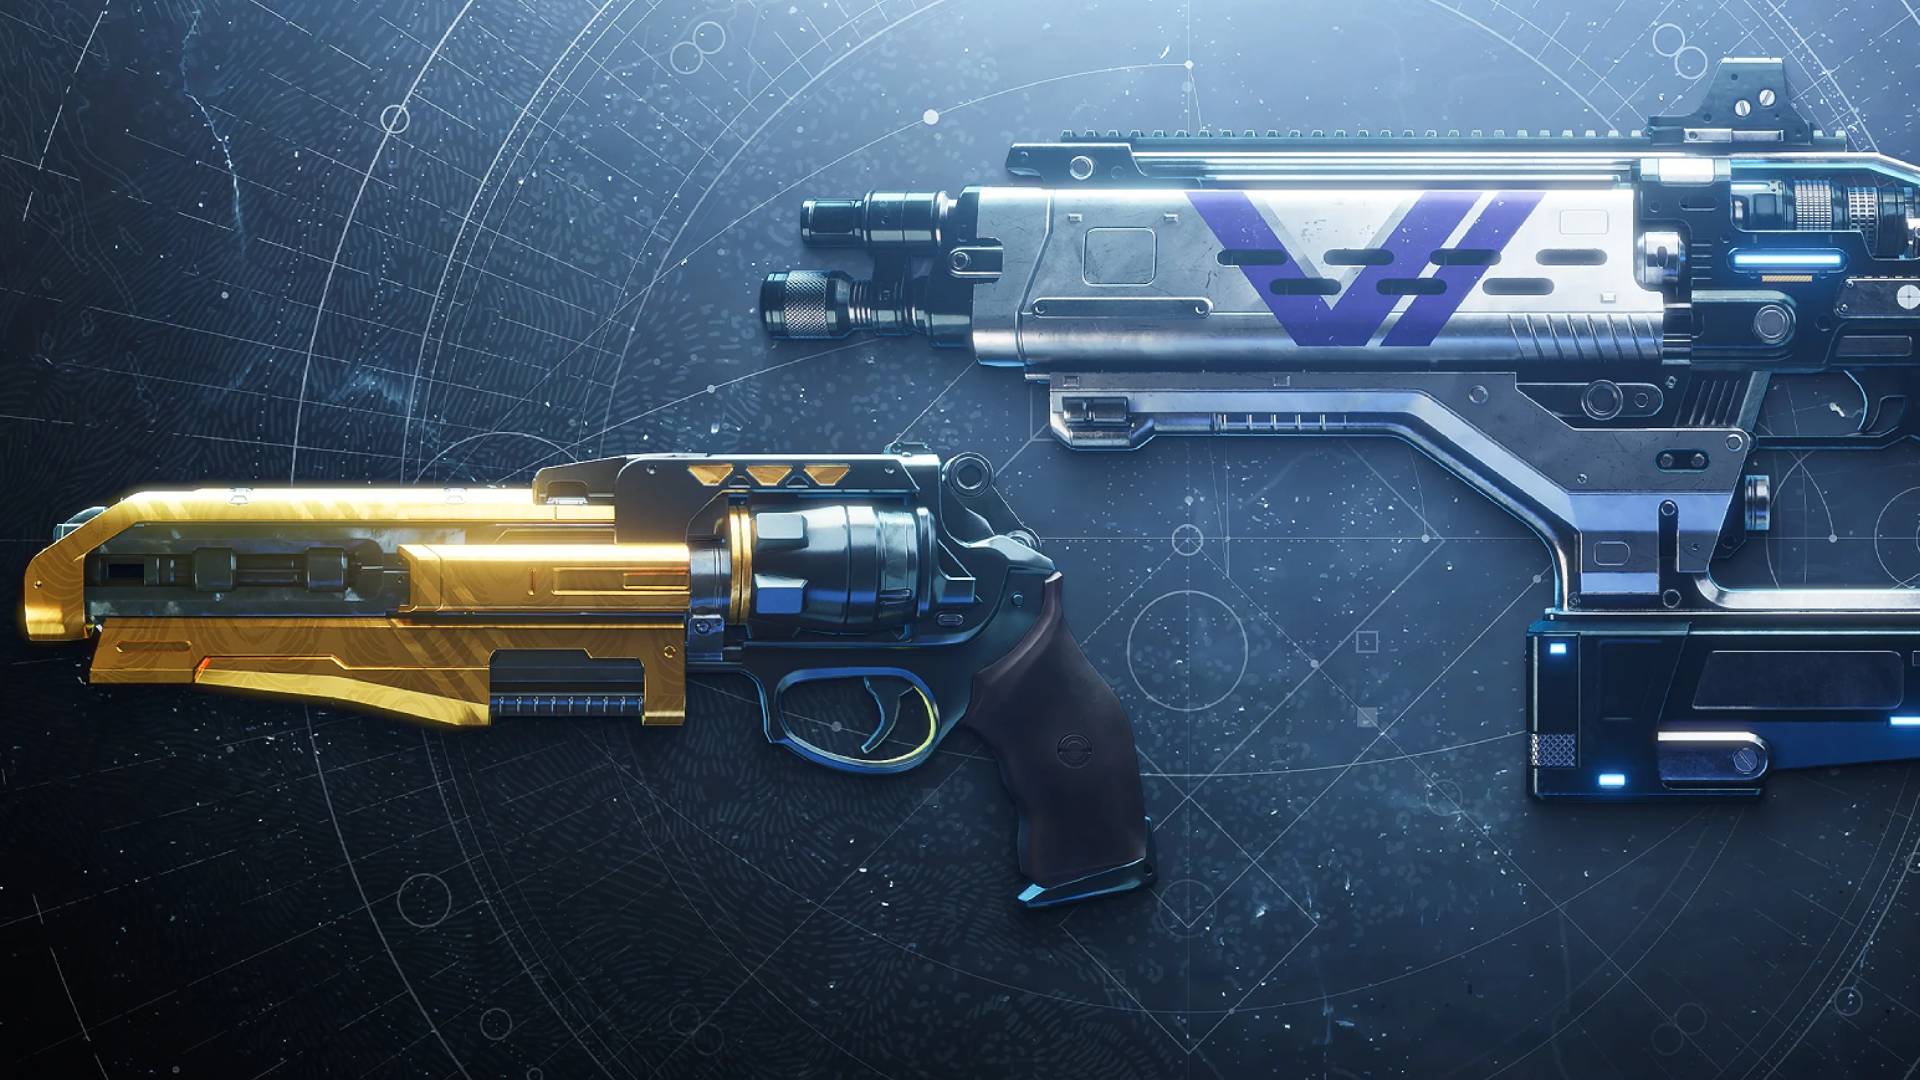 How to get Destiny 2 Adept mods and what they do